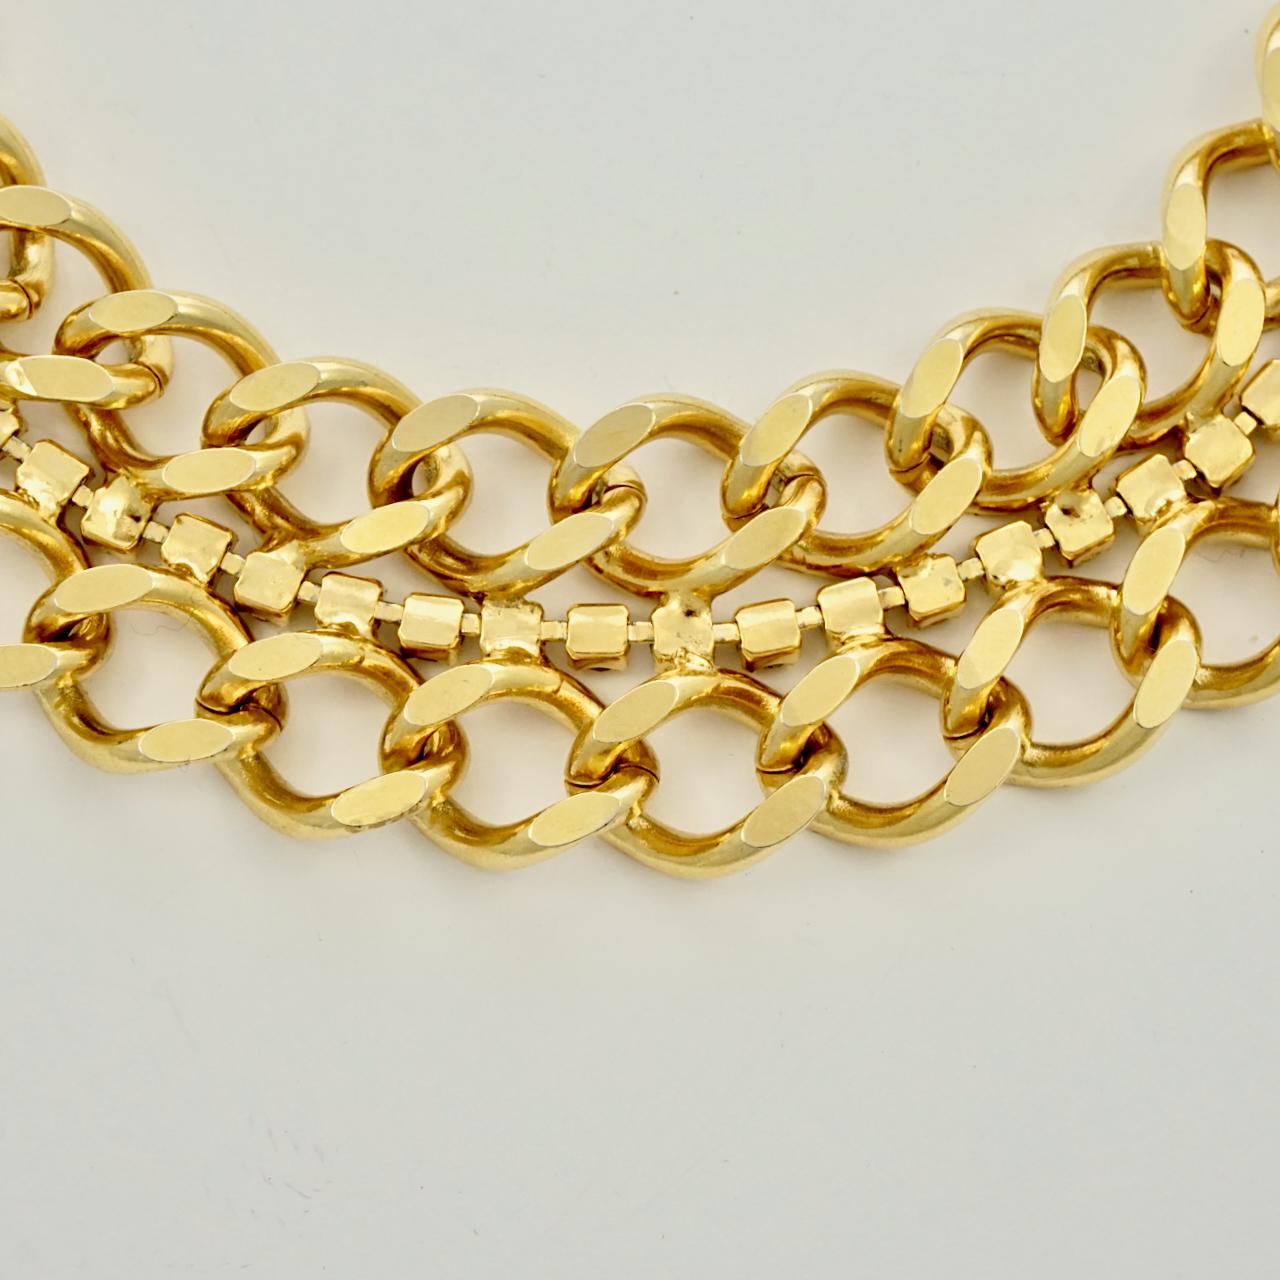 Gold Plated Curb Link Chain Collar Necklace with Rhinestones circa 1980s For Sale 3